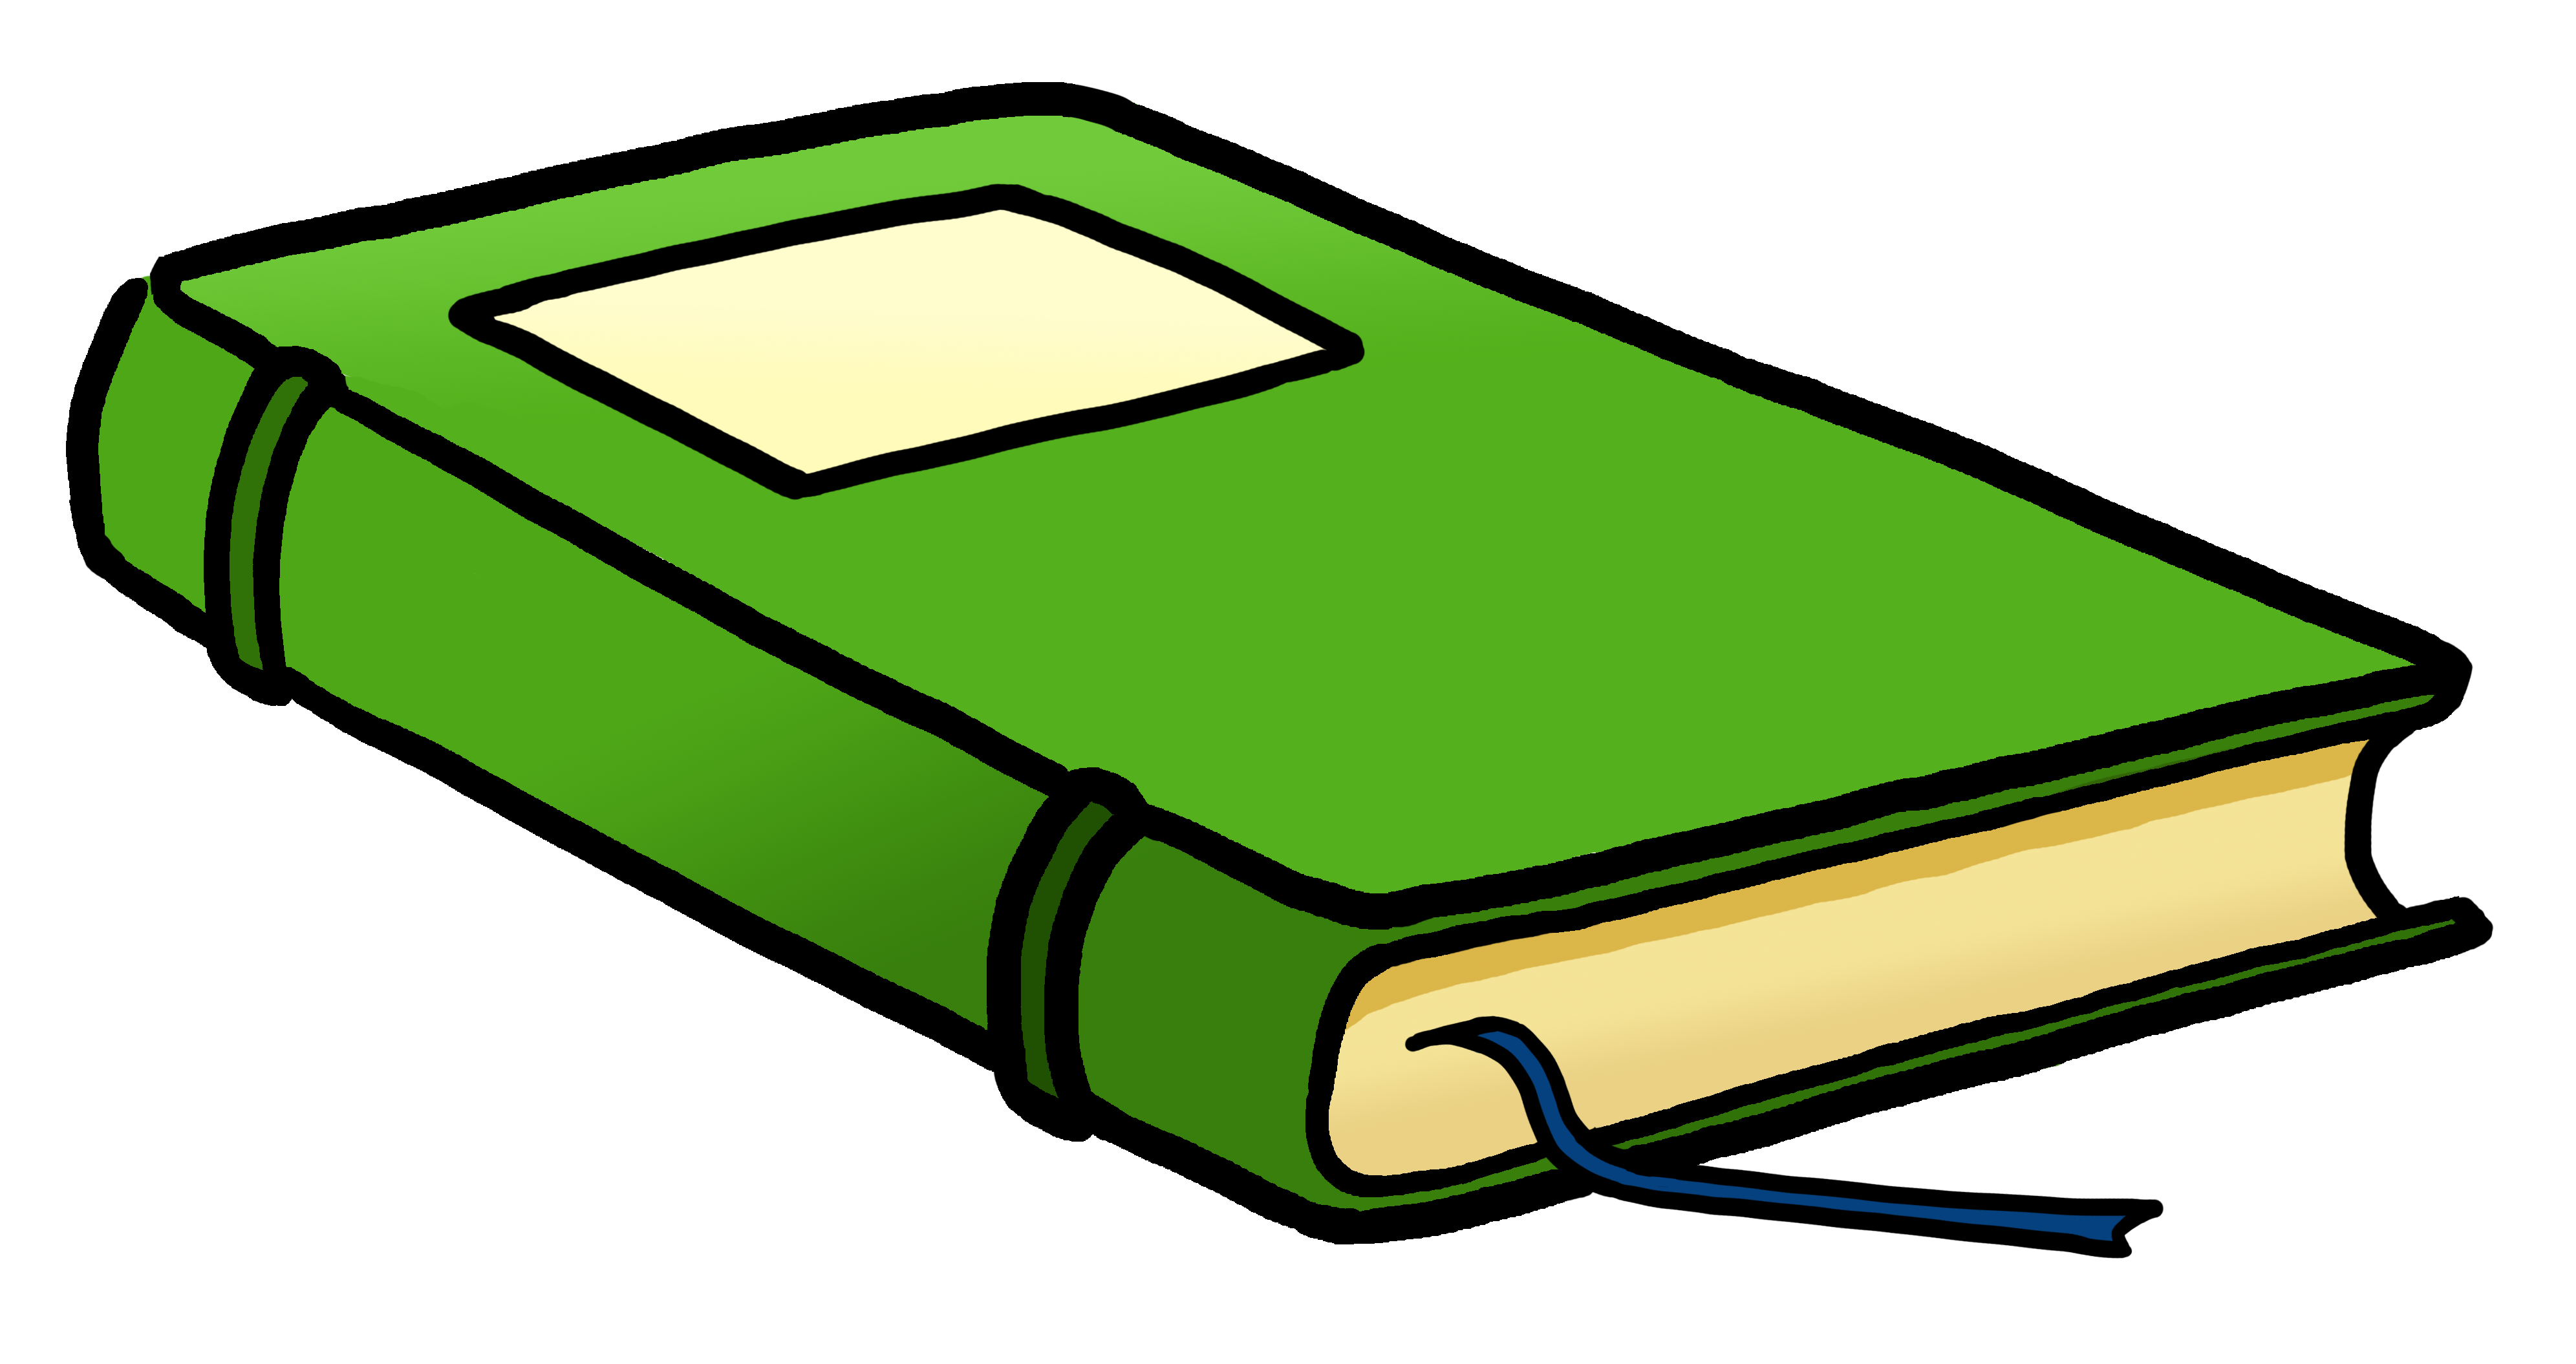 Books closed book clip art free clipart images